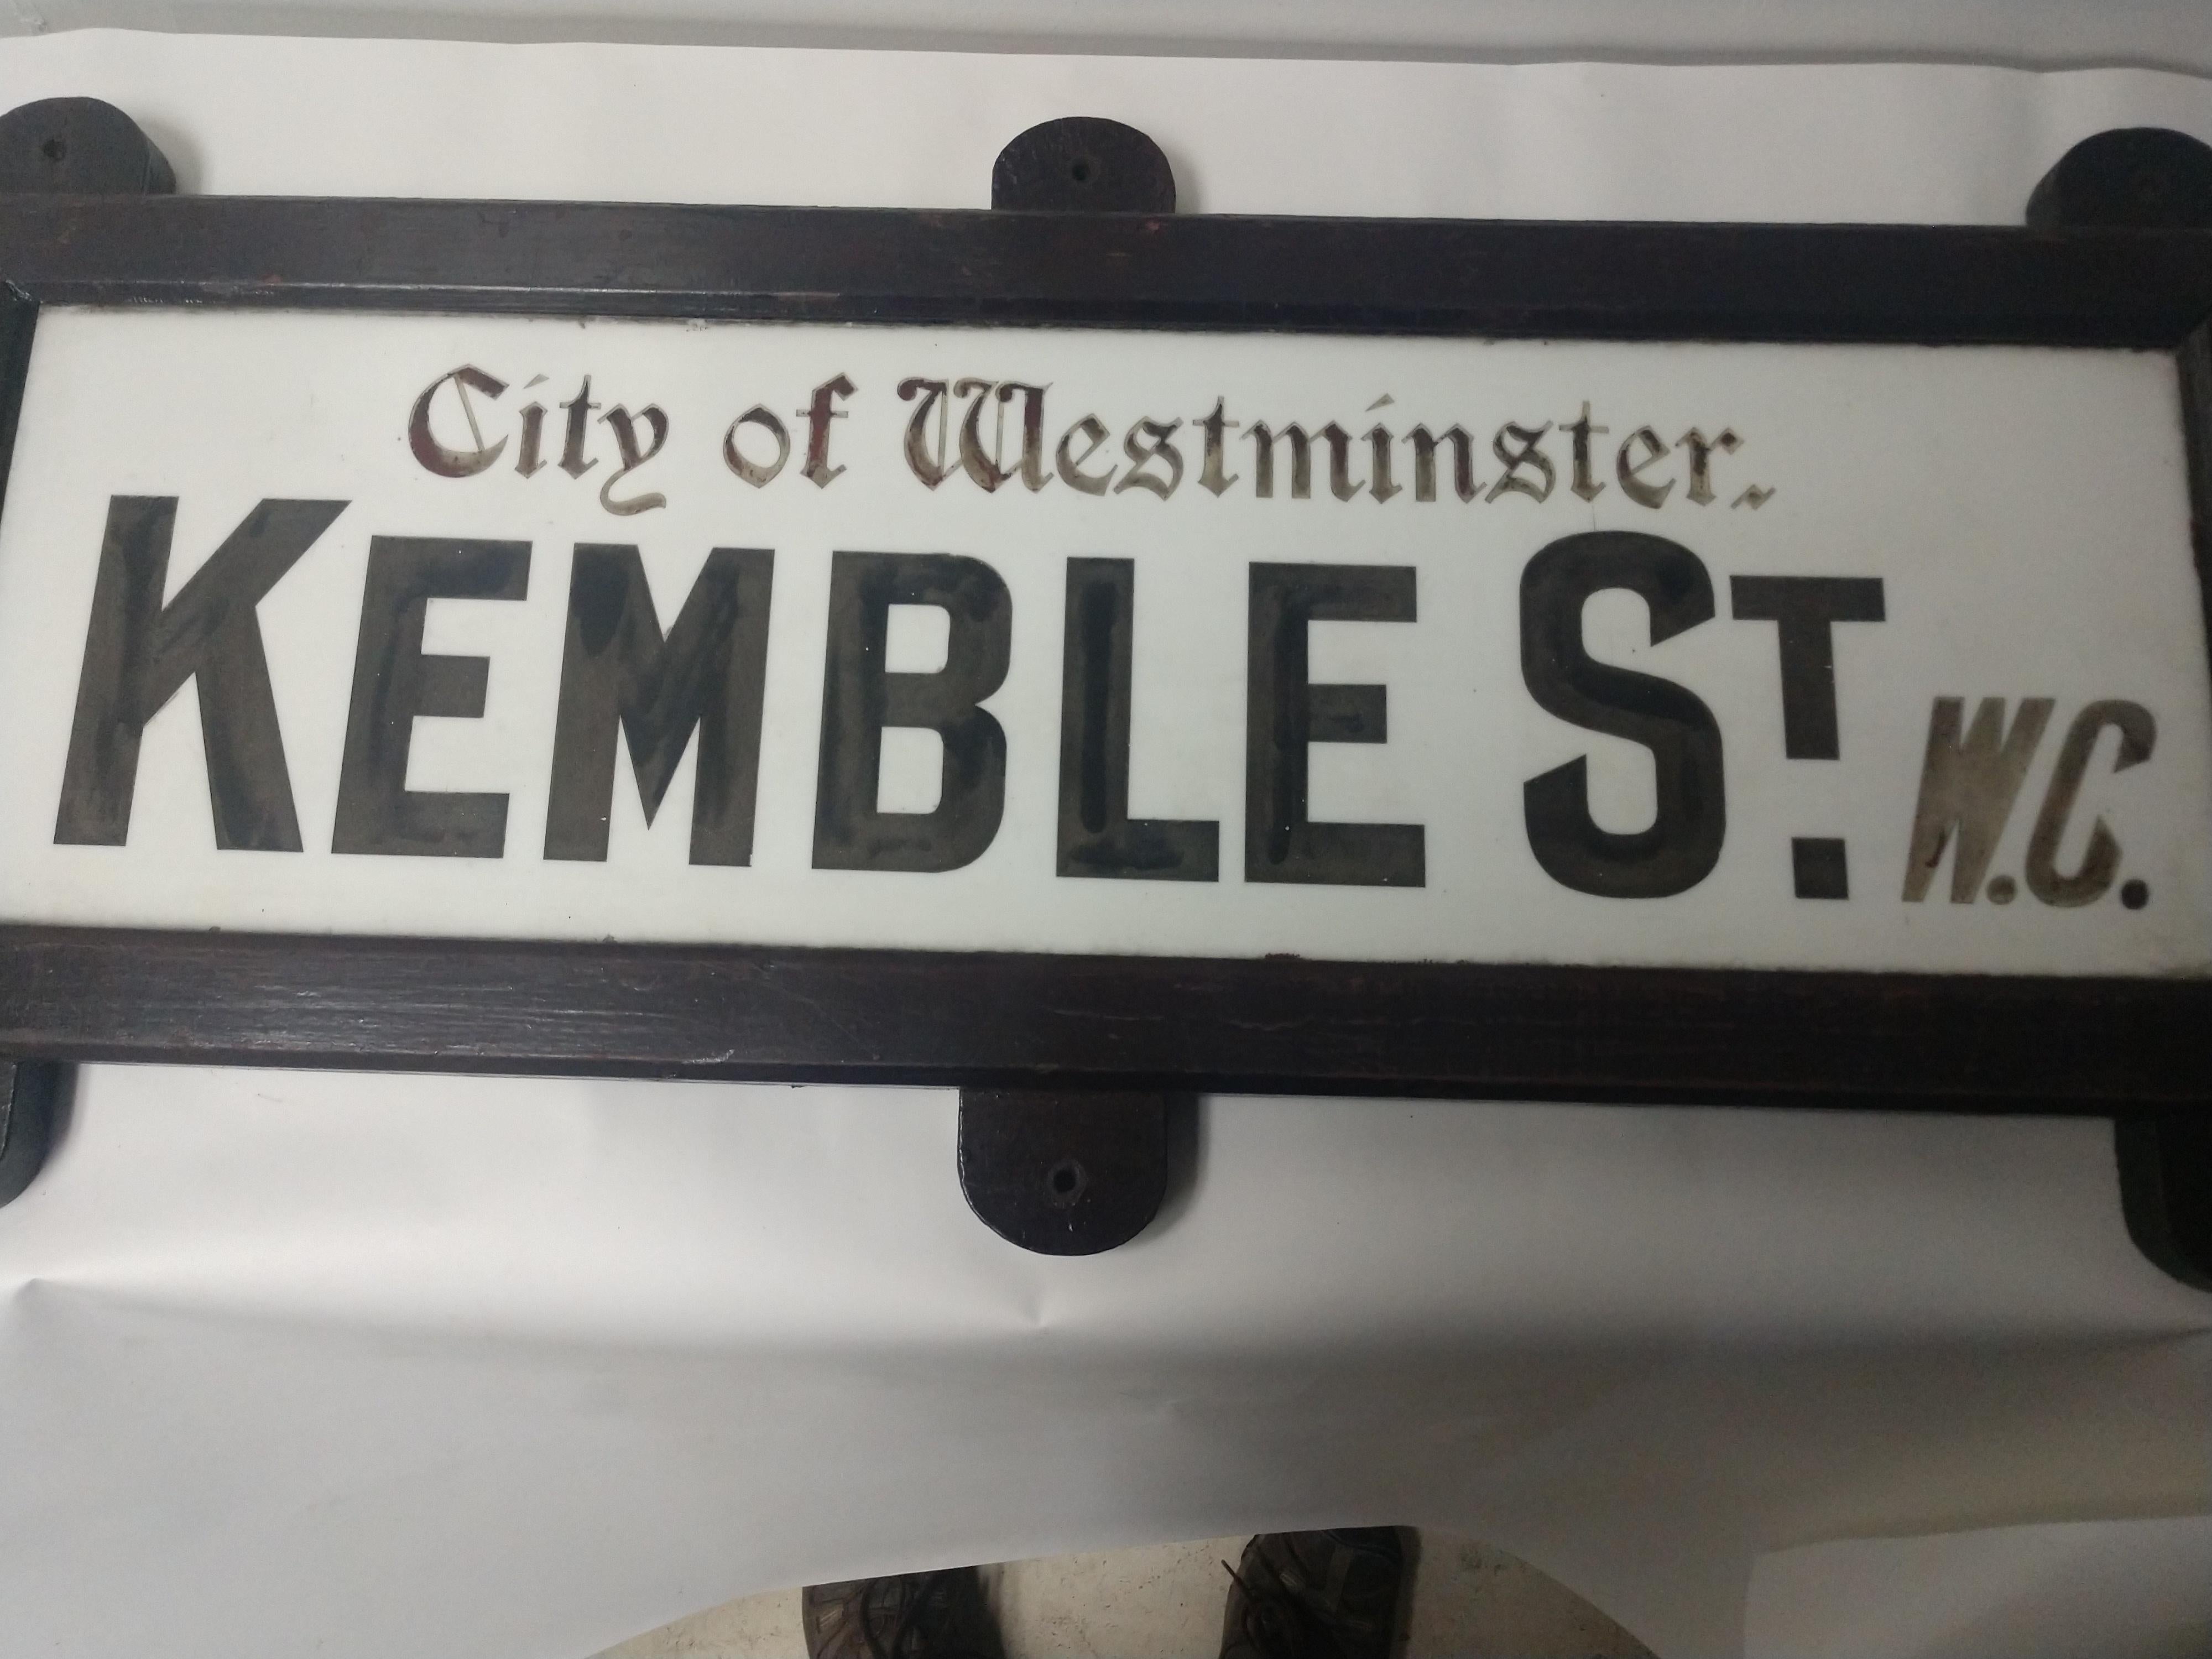 Fabulous etched milk glass street sign from the City of Westminster, England.
Original Arts & Crafts style frame in excellent vintage condition.